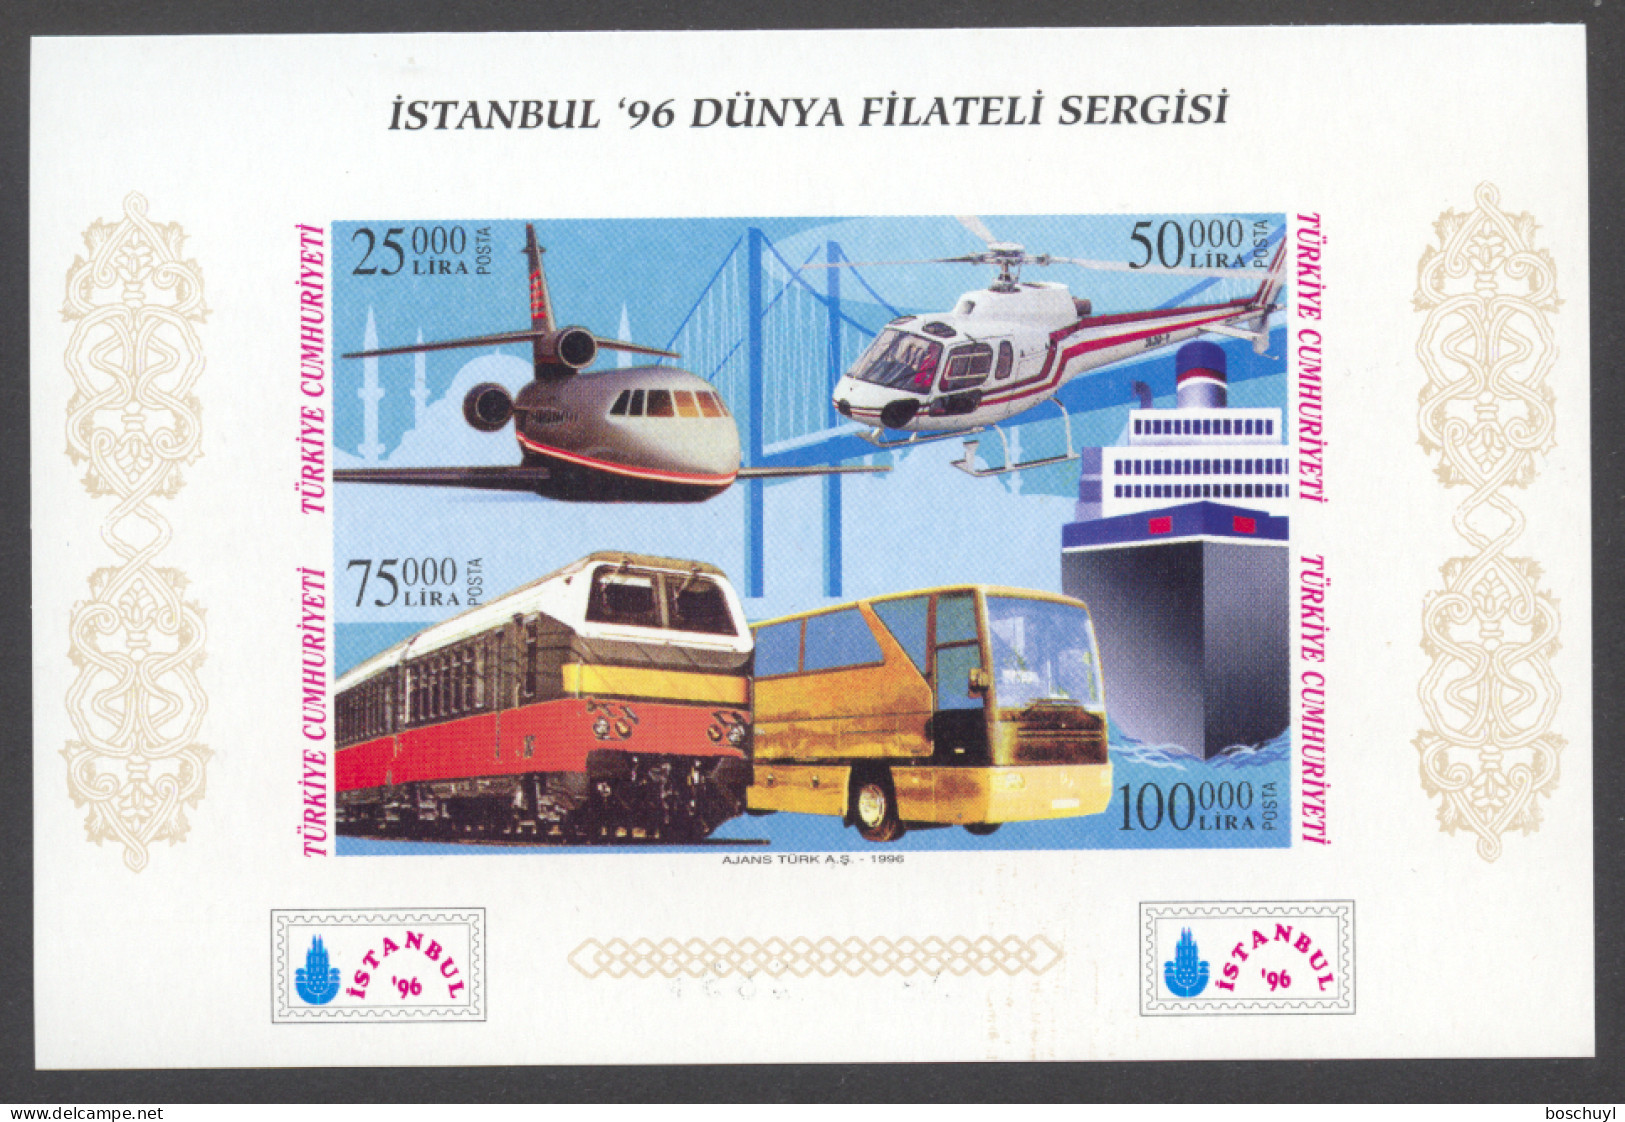 Turkey, 1996, Airplane, Helicopter, Train, Bus, Boat, Istanbul Exhibition, Black Imprint, MNH, Michel Block 32Bb - Neufs